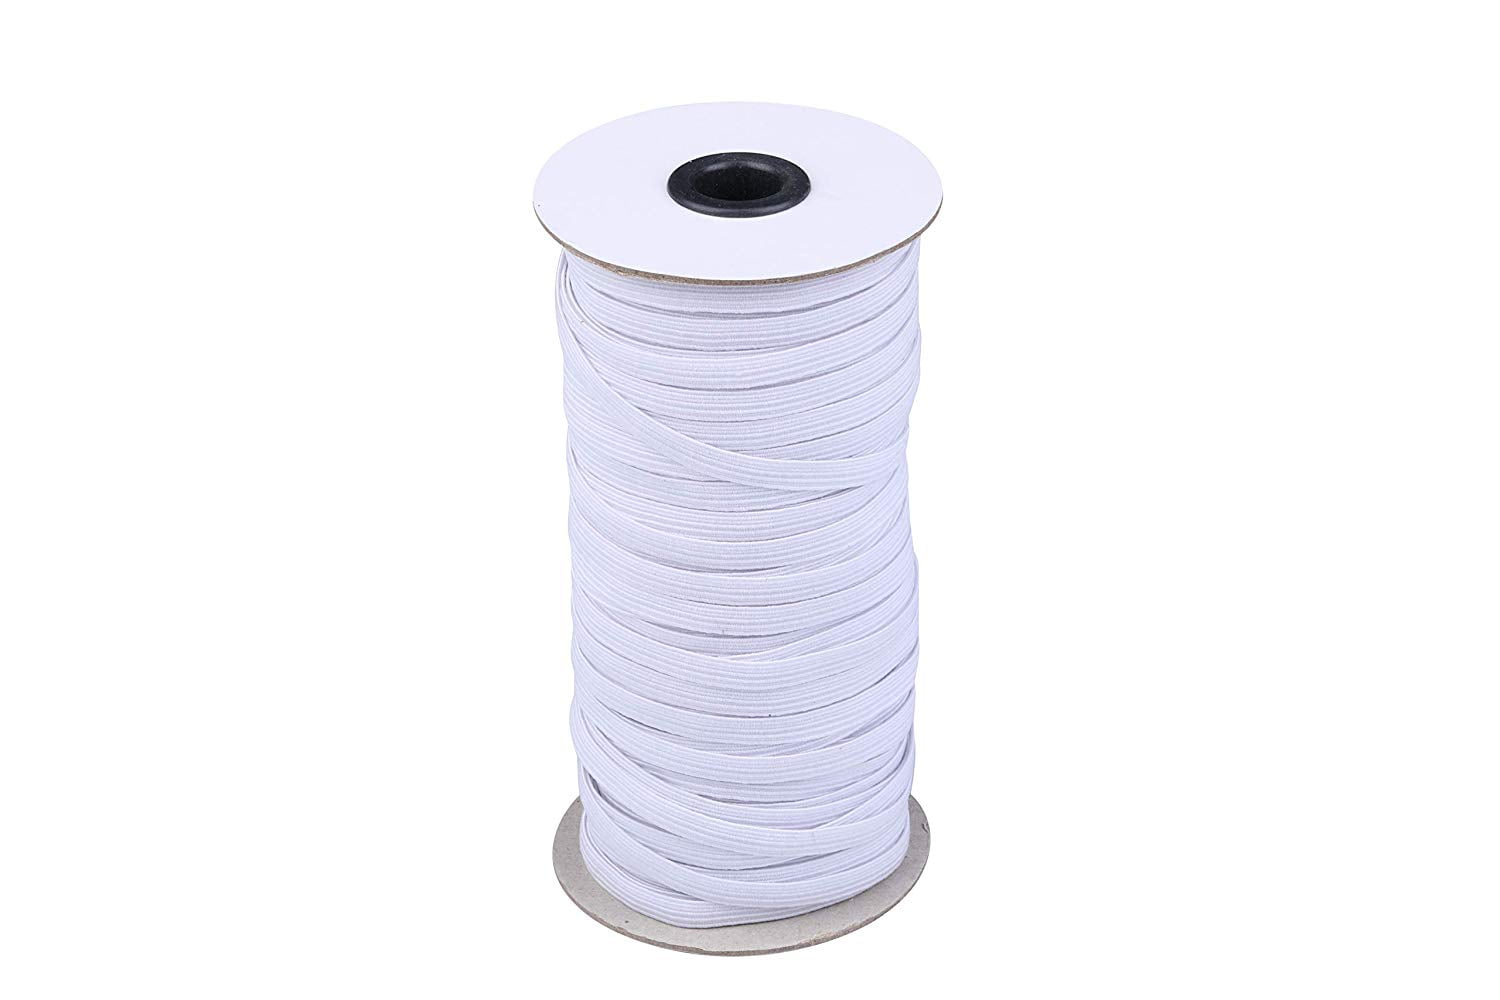 Elastic Band for Sewing 1/4 inch, White Elastic String Cord Elastic Rope  Heavy Stretch High Elasticity Knit Strap Trim Spandex Strings for Making